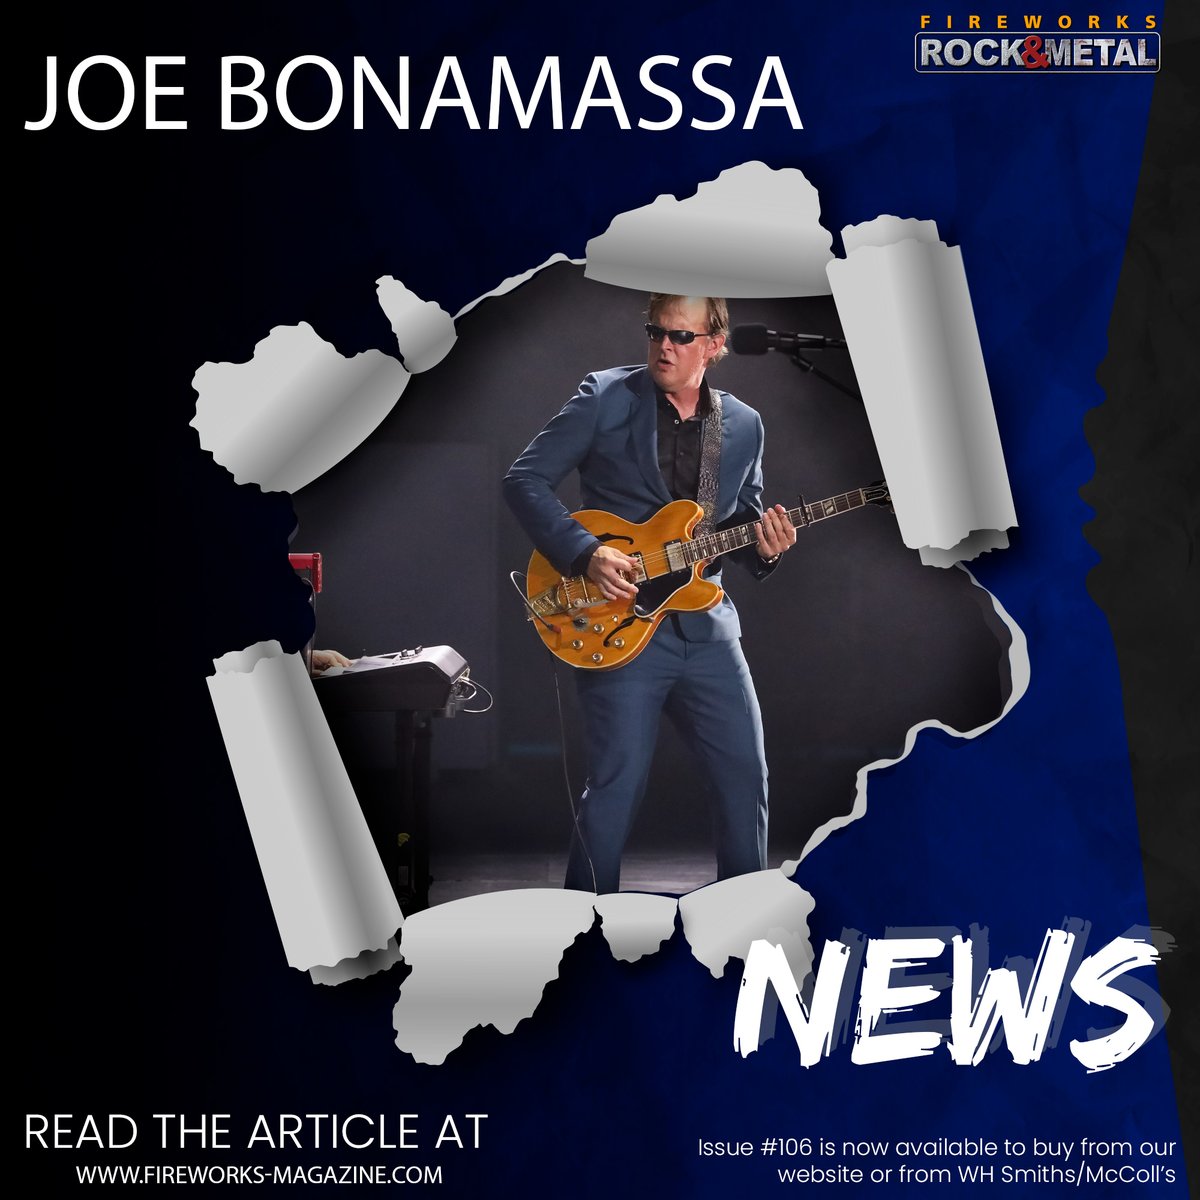 𝐀𝐖𝐄𝐒𝐎𝐌𝐄! Joe Bonamassa Releases 'Ball Peen Hammer' From 'Live At The Hollywood Bowl With Orchestra' Album. 𝘙𝘦𝘢𝘥 𝘢𝘣𝘰𝘶𝘵 𝘪𝘵 𝘩𝘦𝘳𝘦: wix.to/fH5rAD0 @JBONAMASSA @Noble_PR -- BUY Issue #106 from fireworks-magazine.com